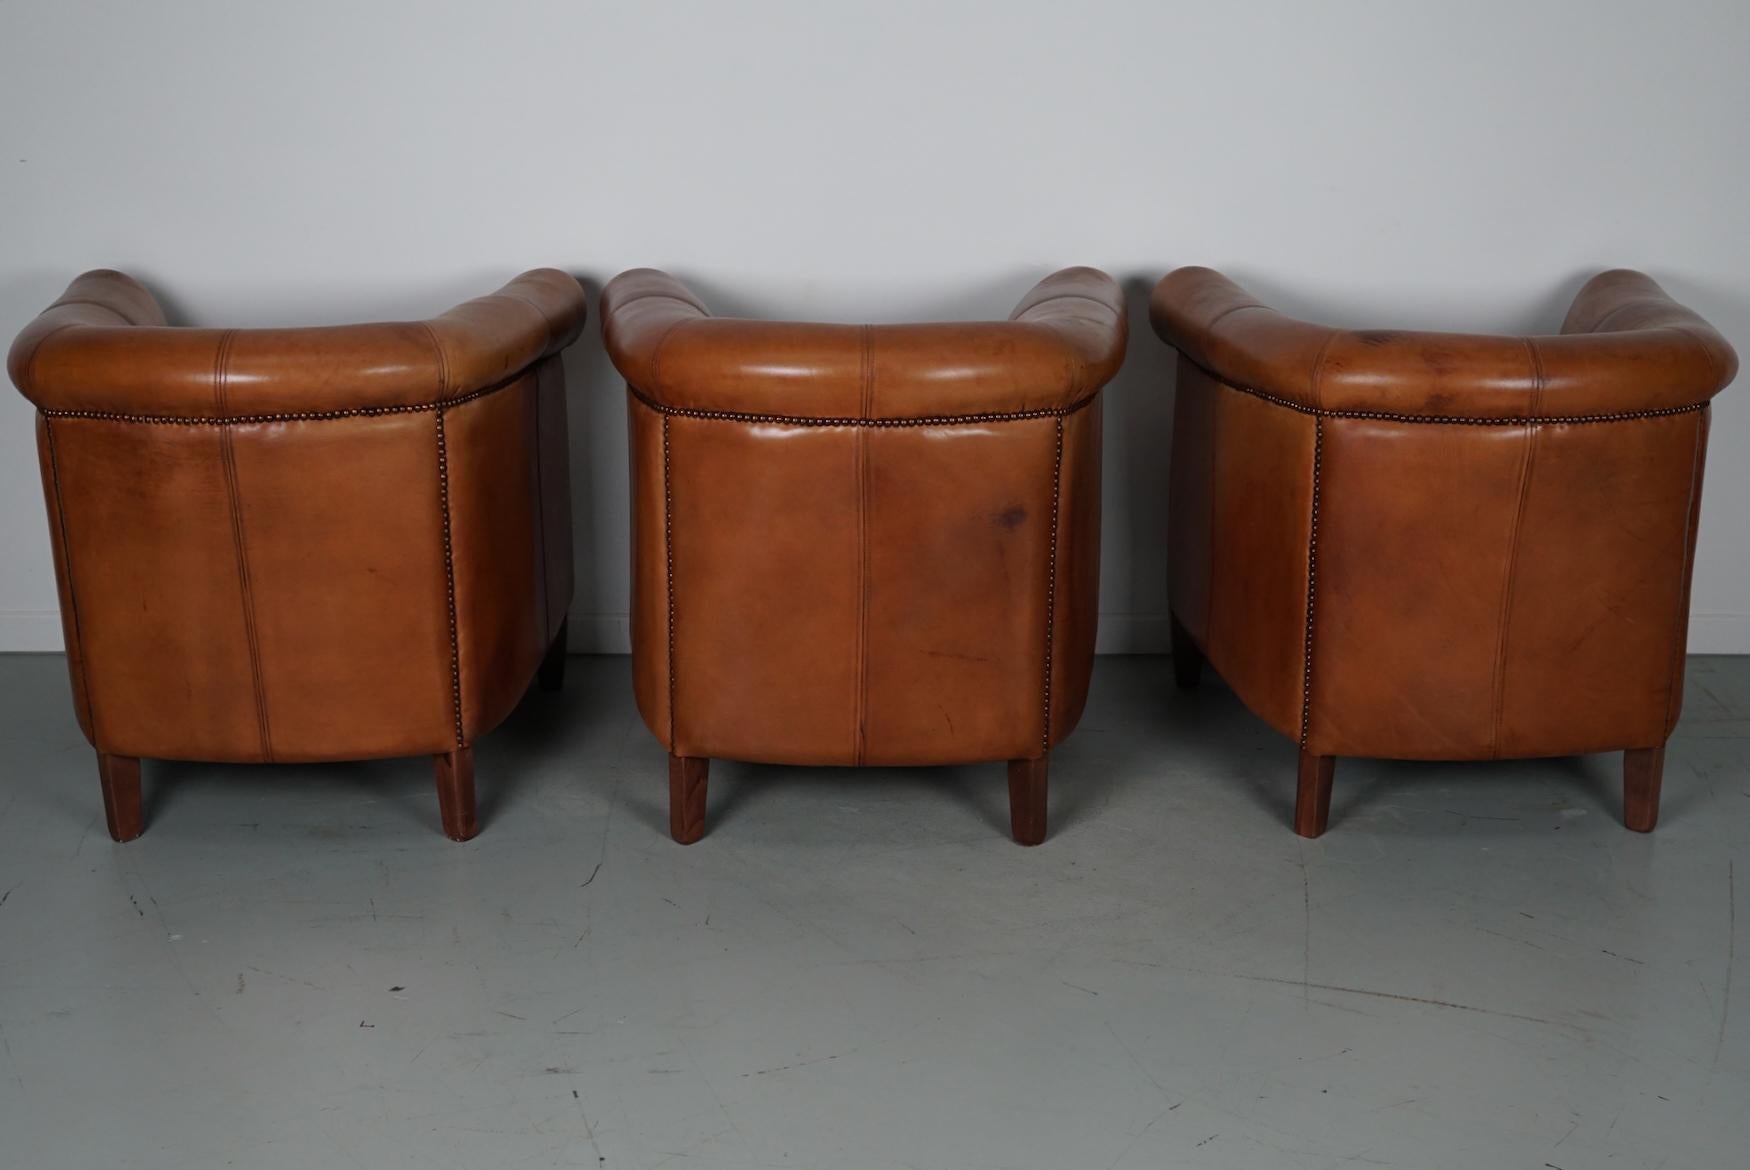  Vintage Dutch Cognac Leather Club Chairs, Set of Three with Two Footstools For Sale 5